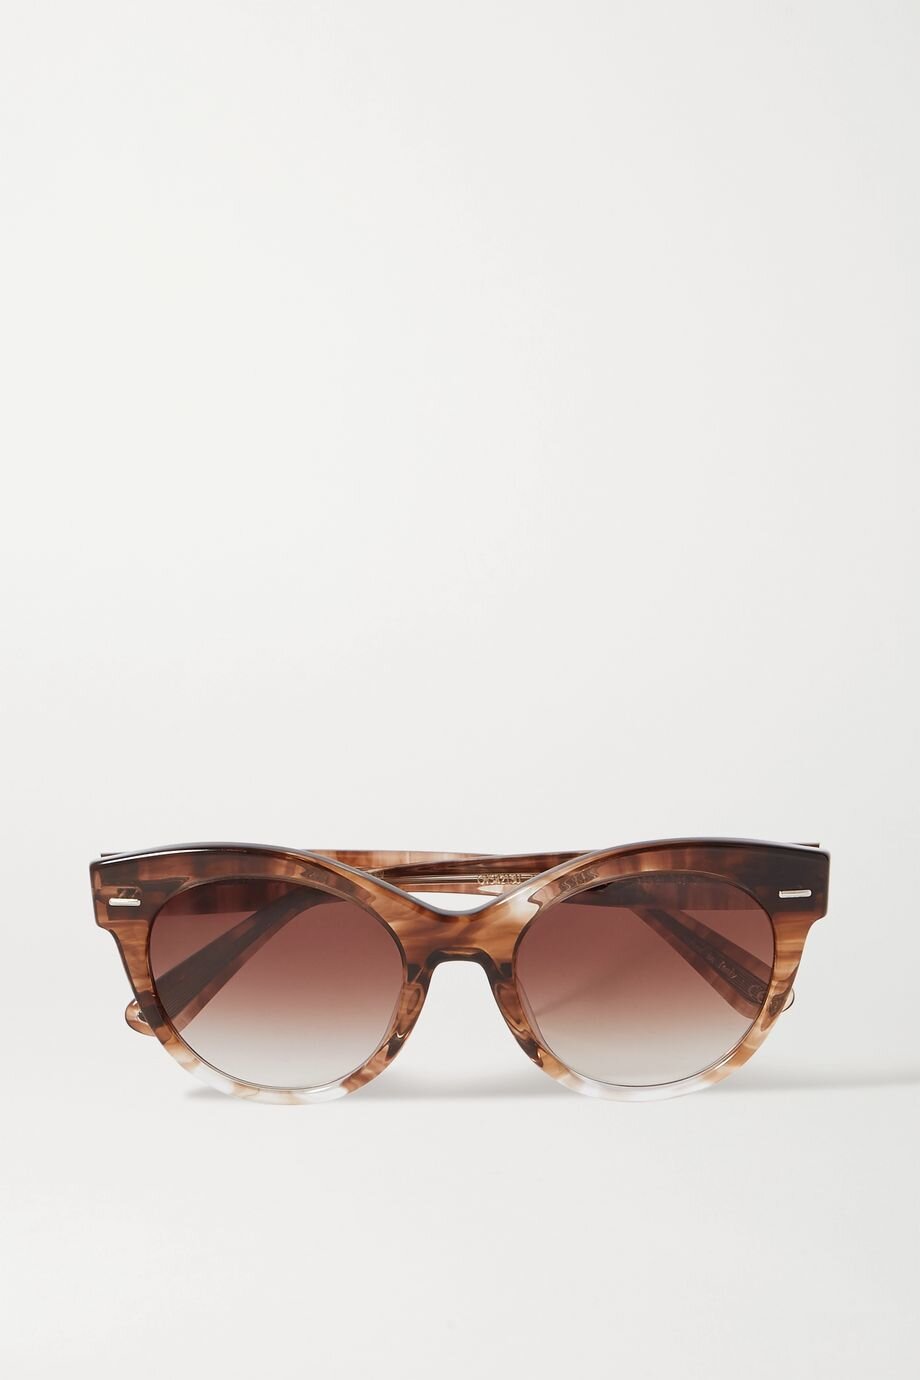 THE ROW + OLIVER PEOPLES